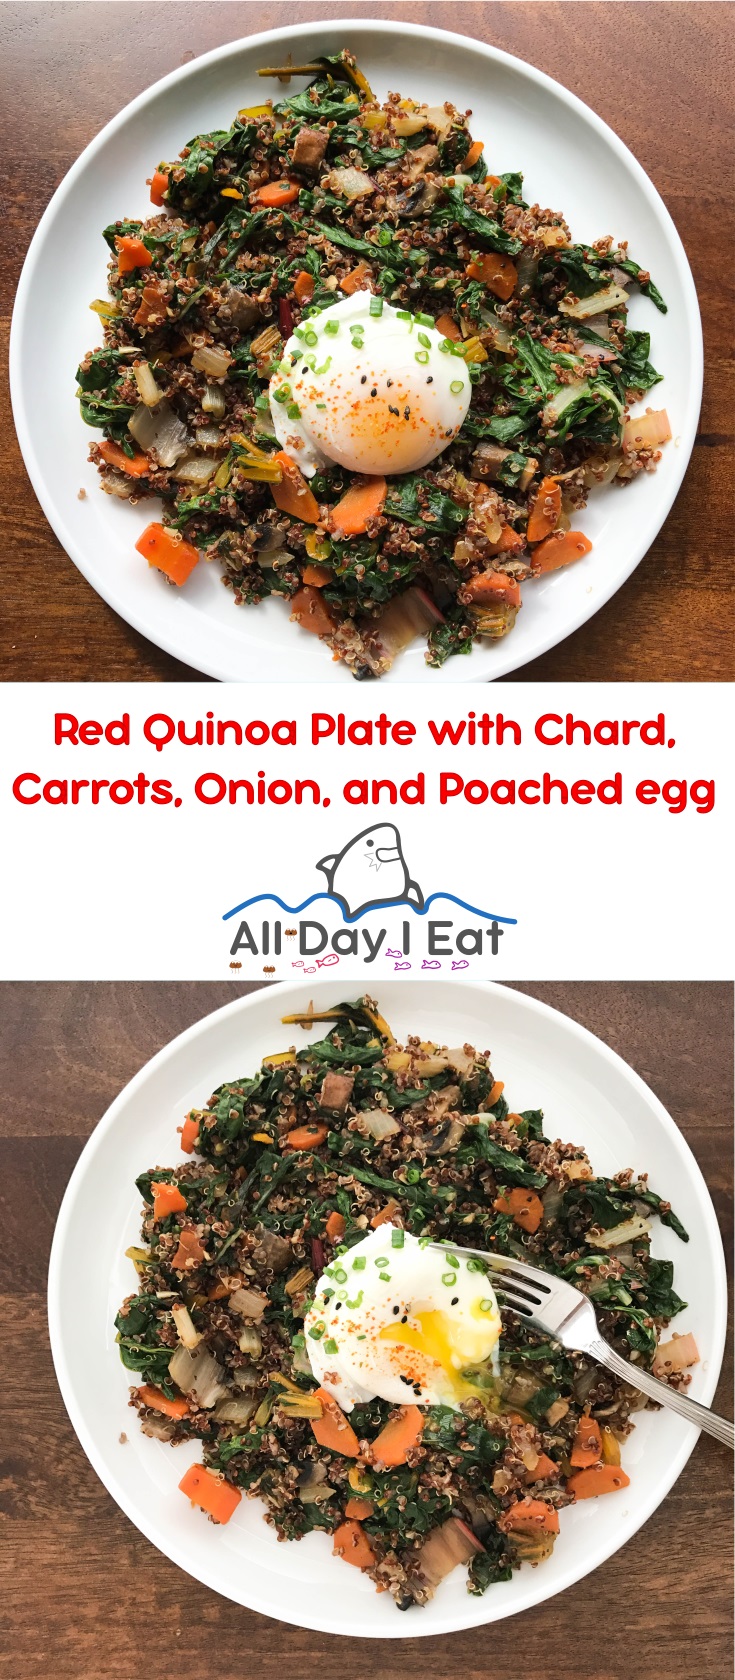 Red Quinoa Plate with Chard, Carrots, Onion, and Poached Egg| www.alldayieat.com